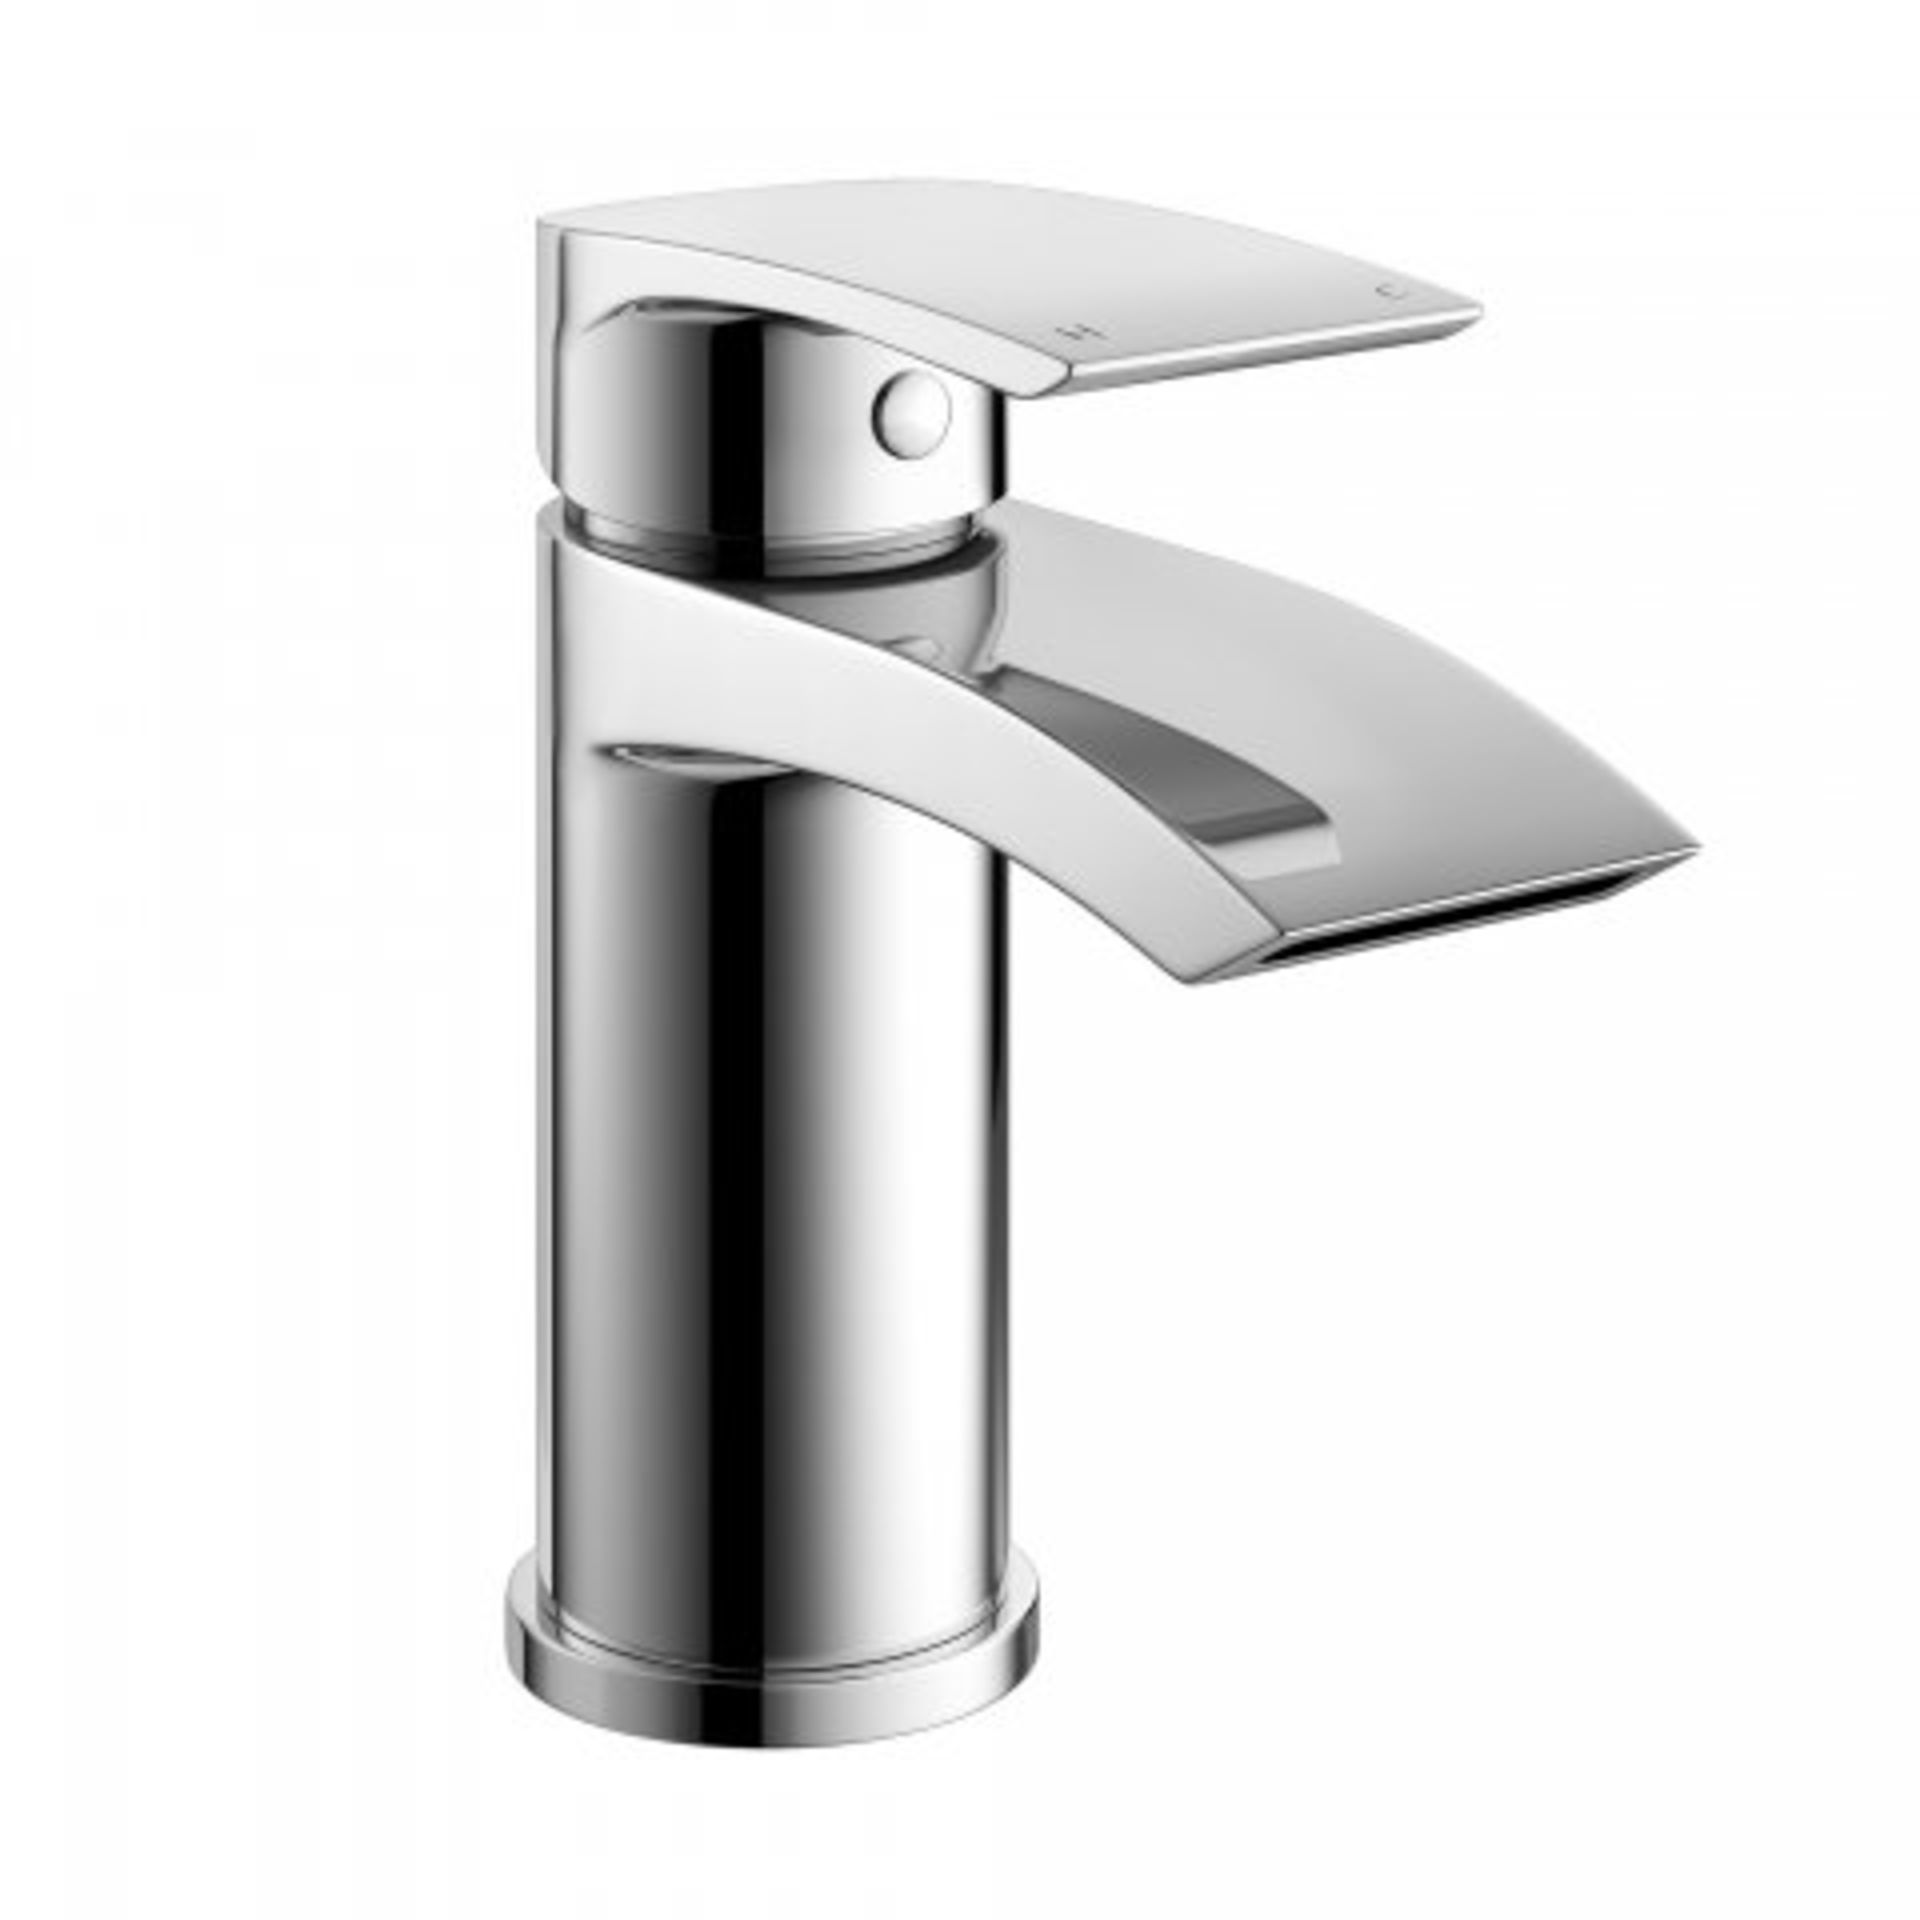 (N95) Nelas Mono Basin Mixer Tap Peace Of Mind Reflective mirror chrome offers a seamless and - Bild 2 aus 2